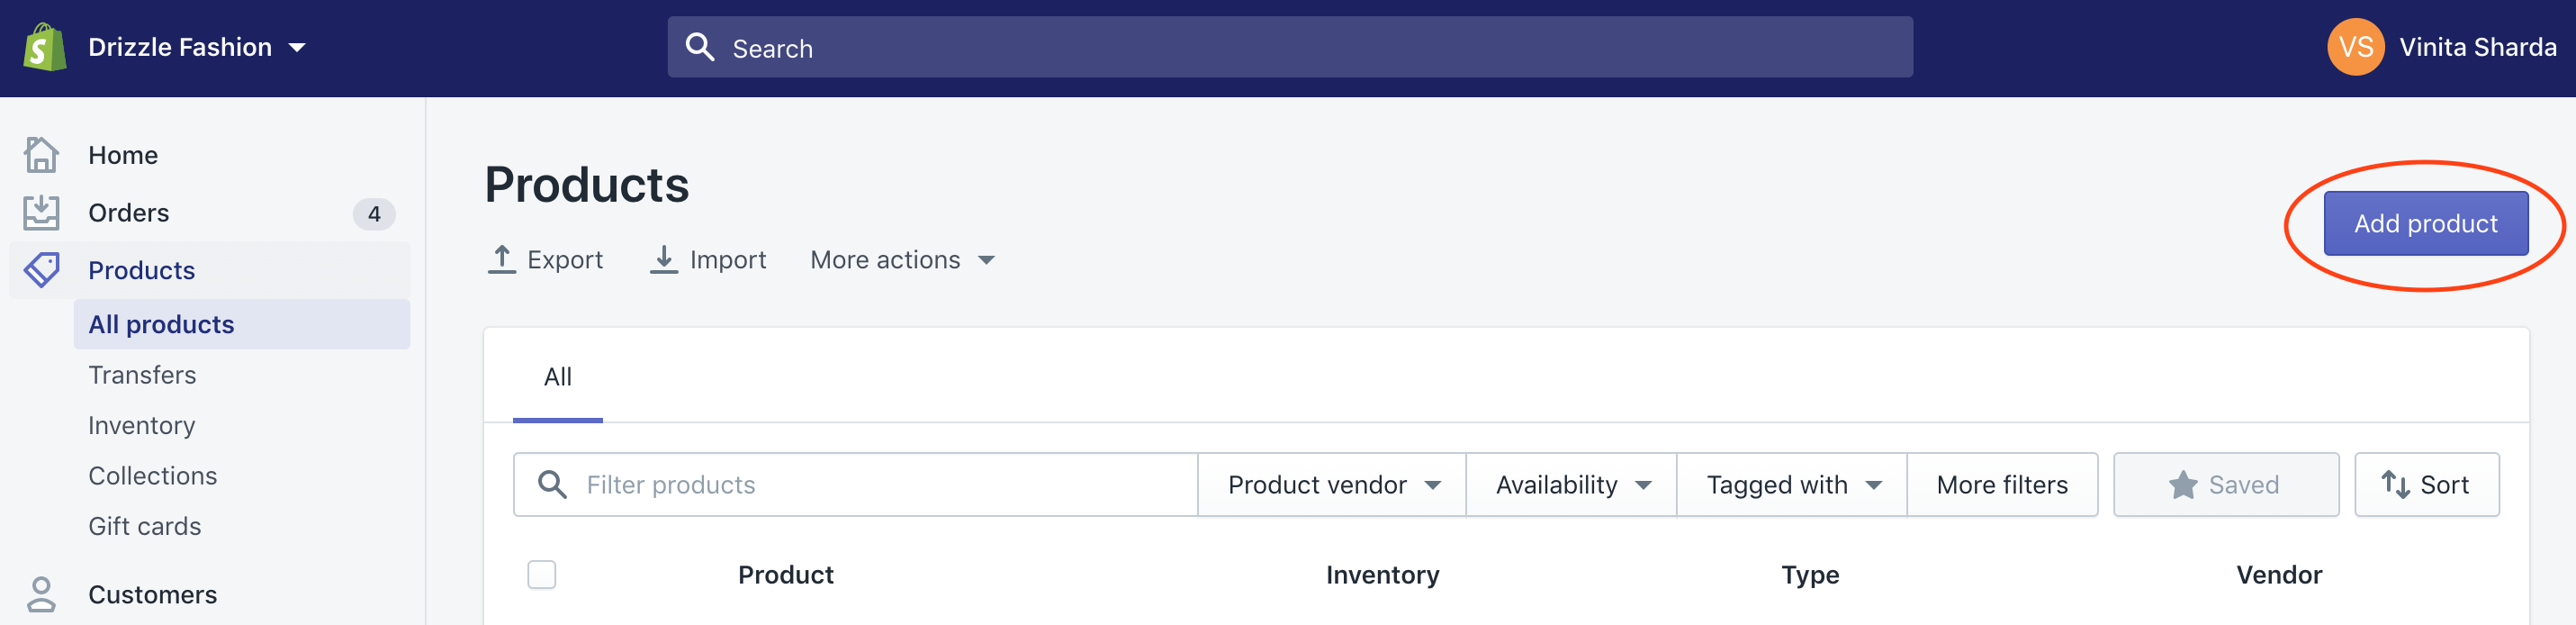 upload products on shopify step 2